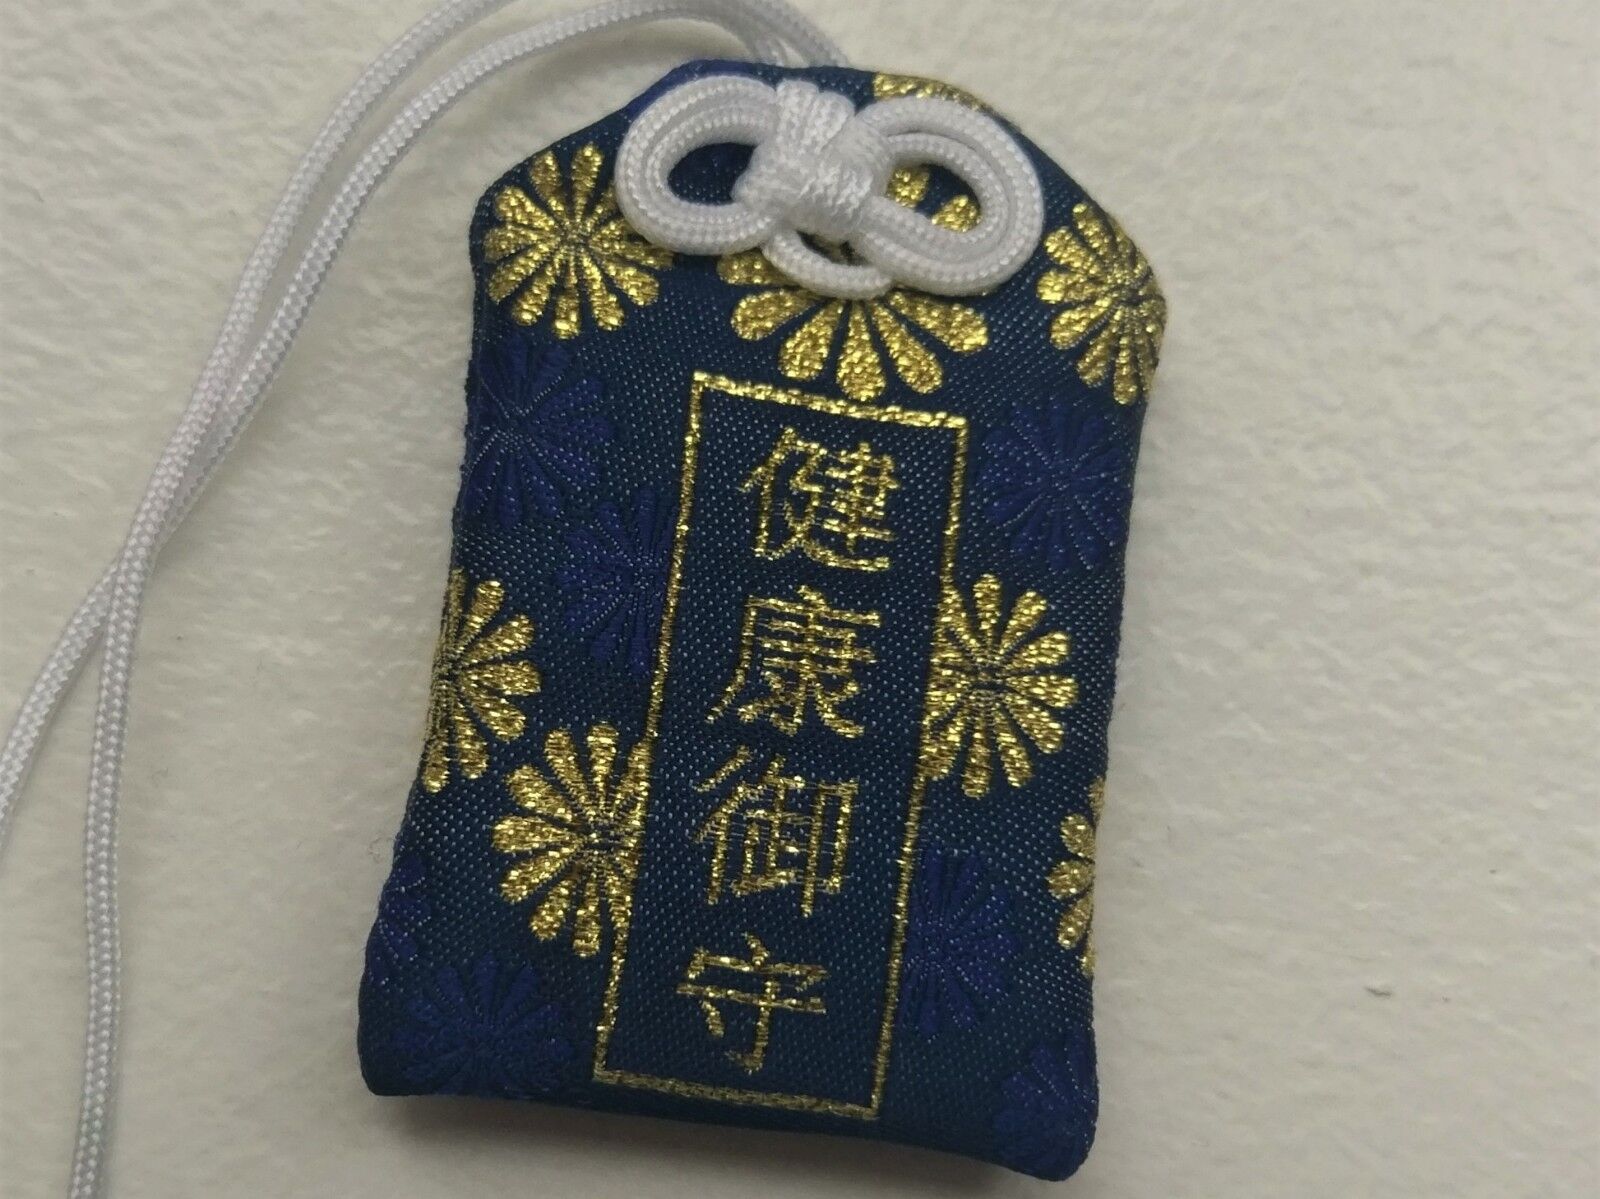 Good Luck Charm for Health in the Coming Year - Japanese Shinto Omamori - Blue